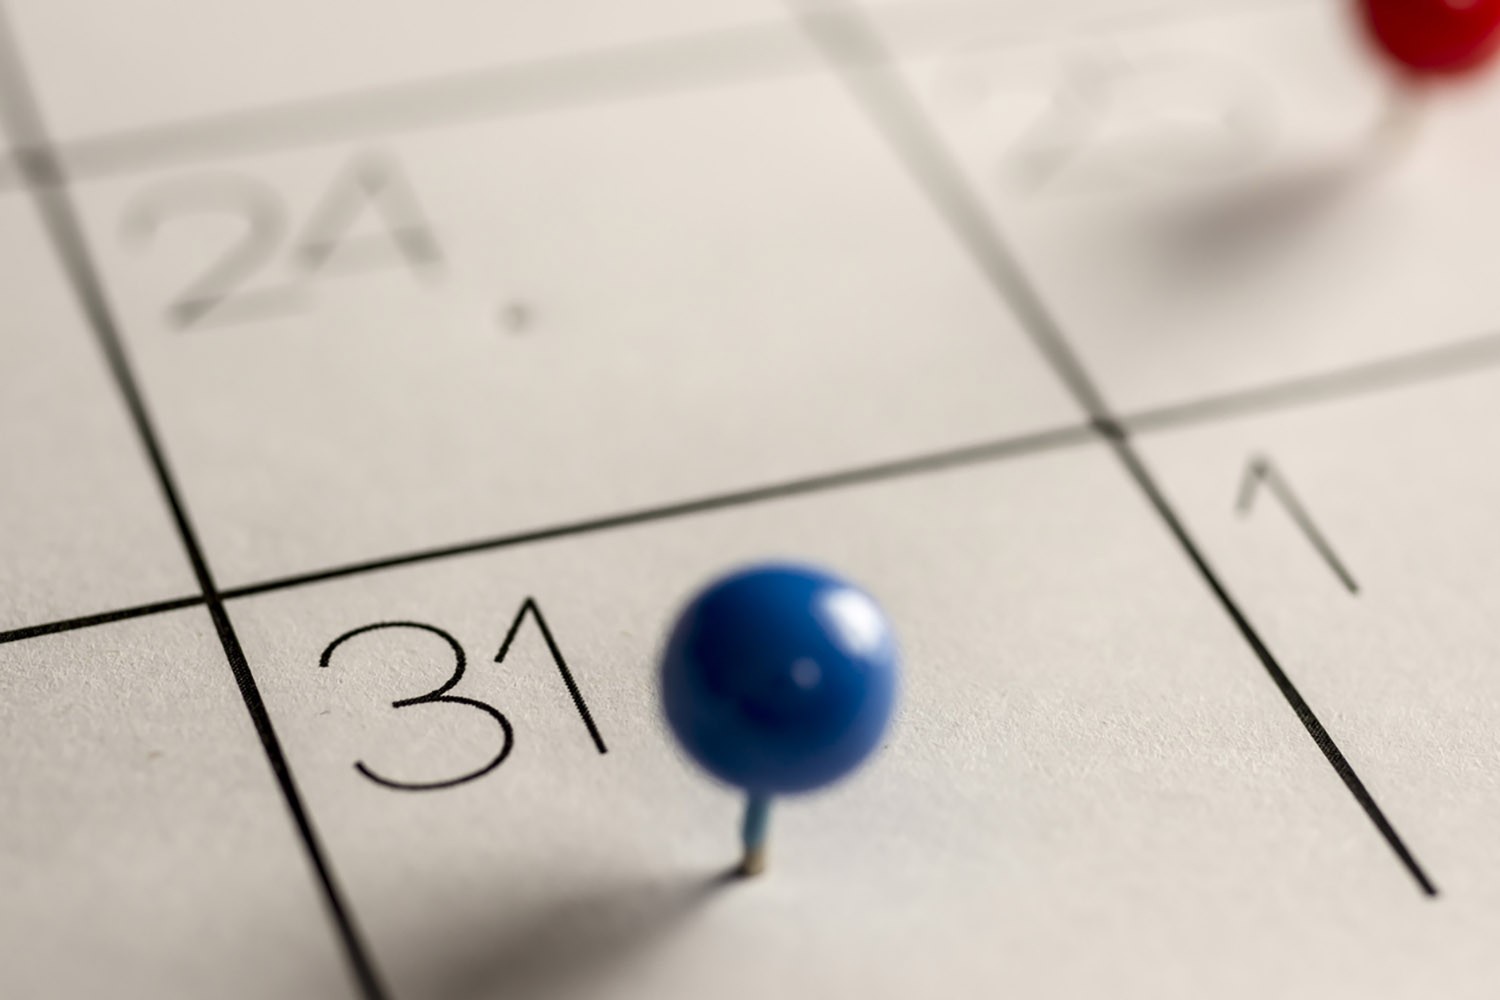 Closeup image of a calendar with a blue pin stuck in the box for the 31st.